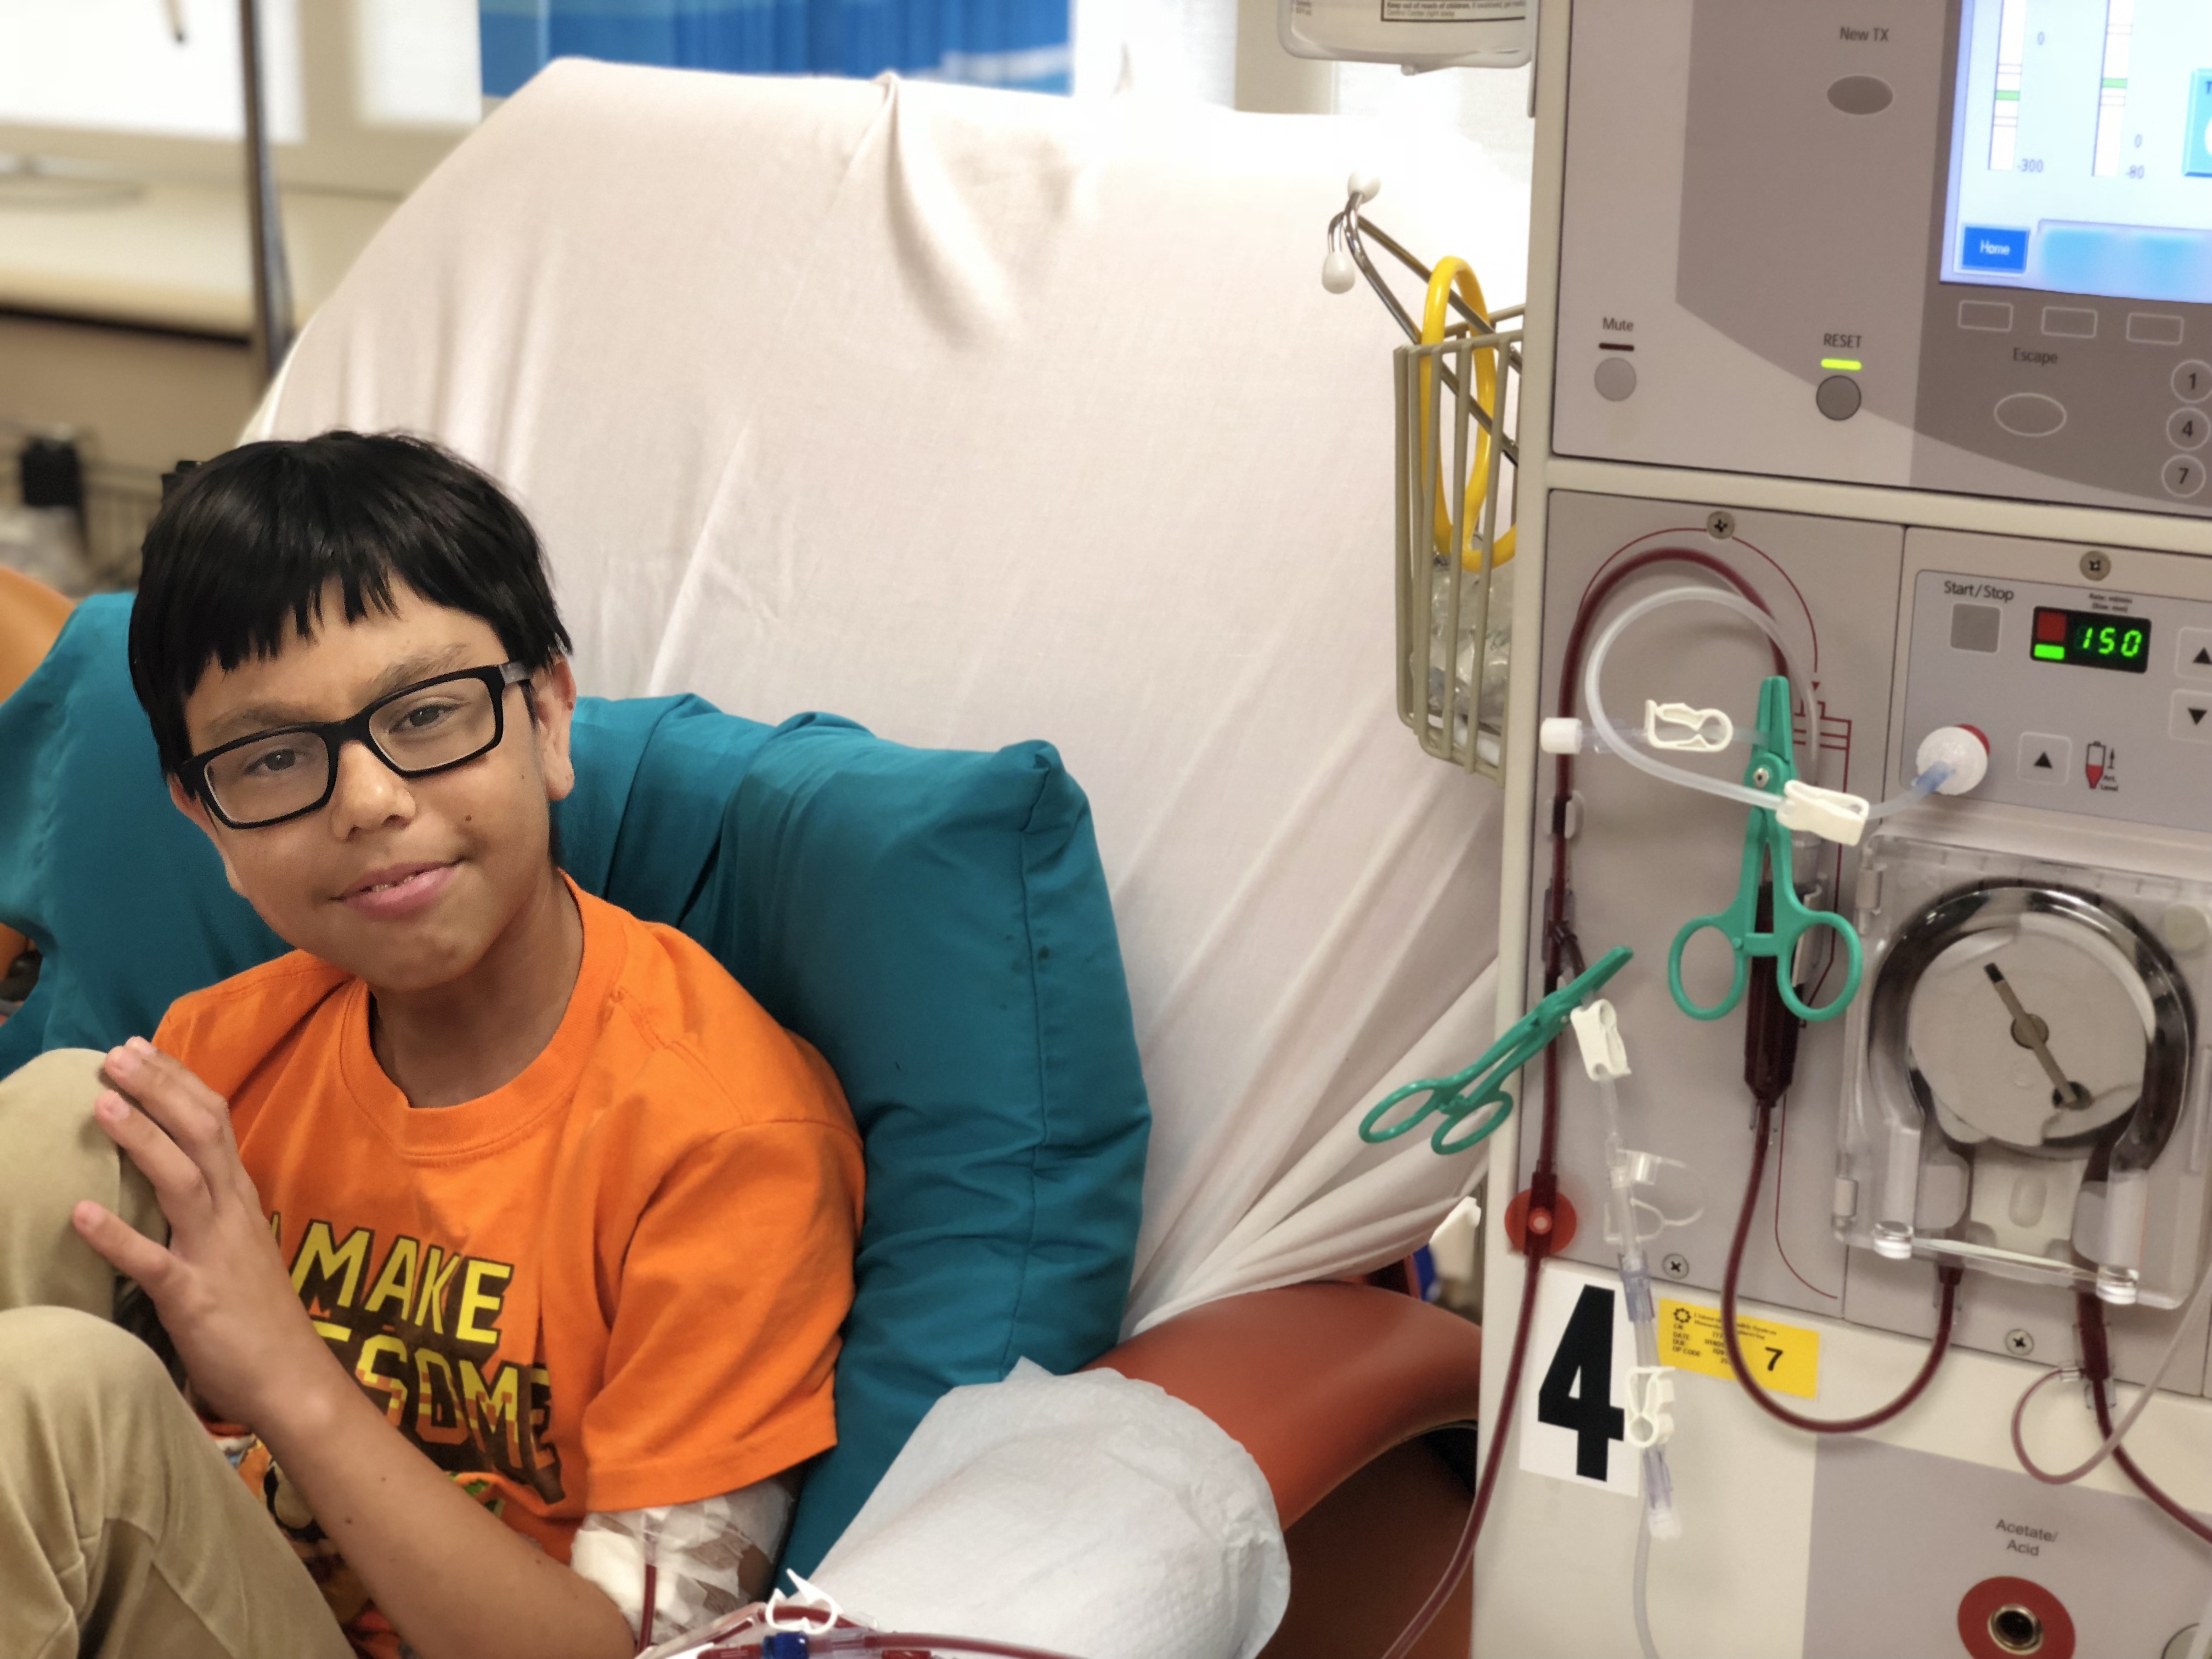 Diego Smith, 15 is undergoing dialysis at University Hospital while waiting for a kidney transplant